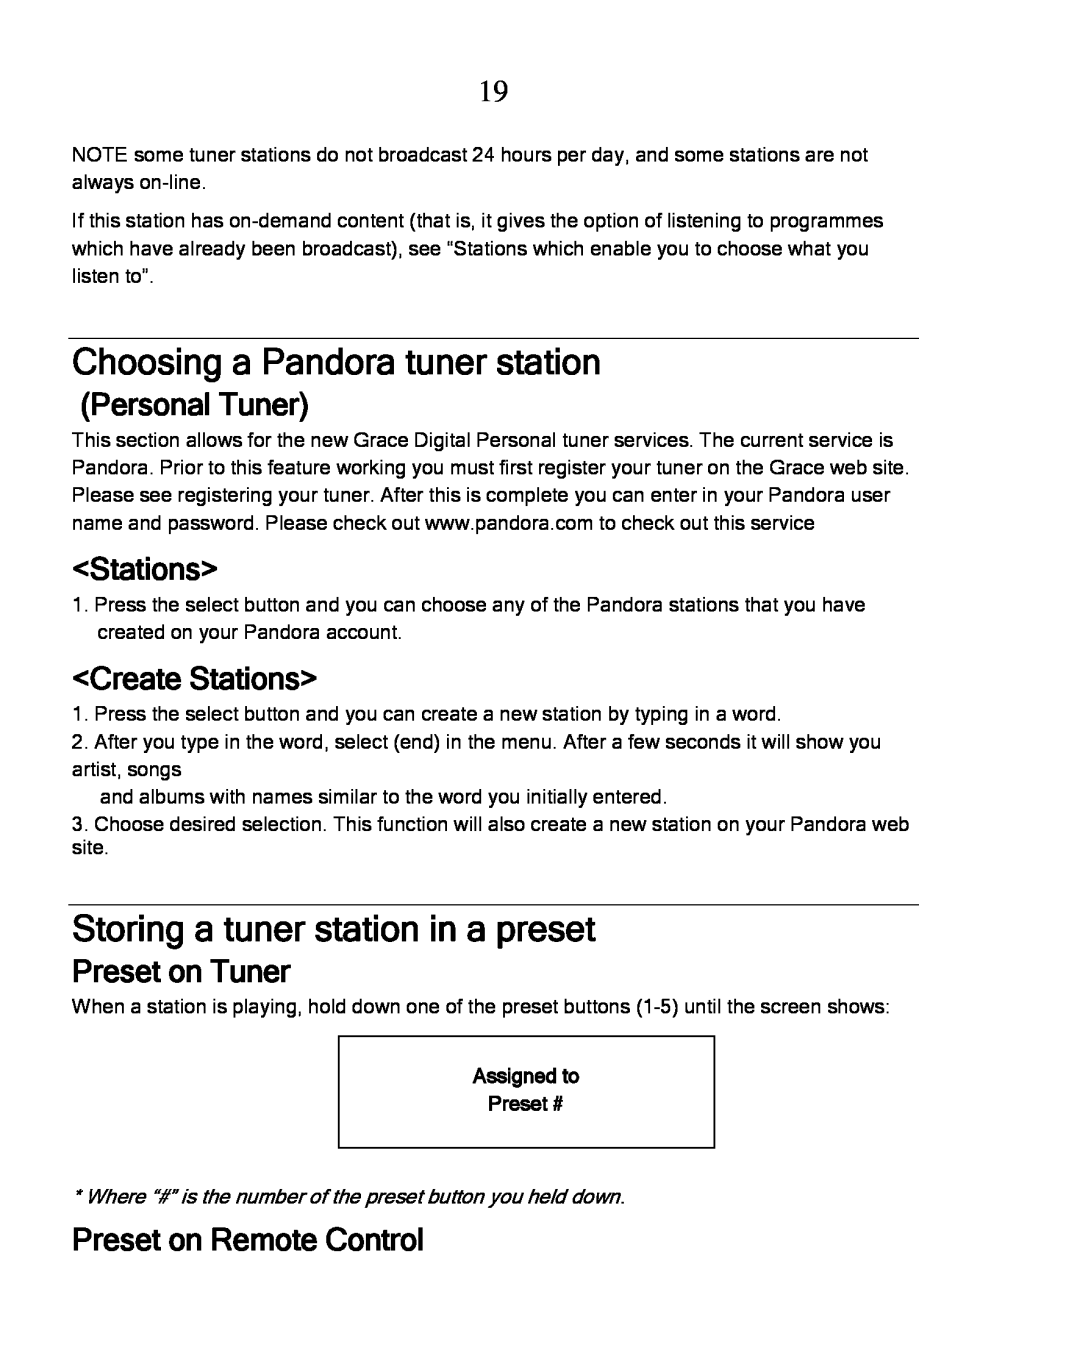 Grace GDI-IRDT200 manual Choosing a Pandora tuner station, Storing a tuner station in a preset, Personal Tuner, <Stations> 